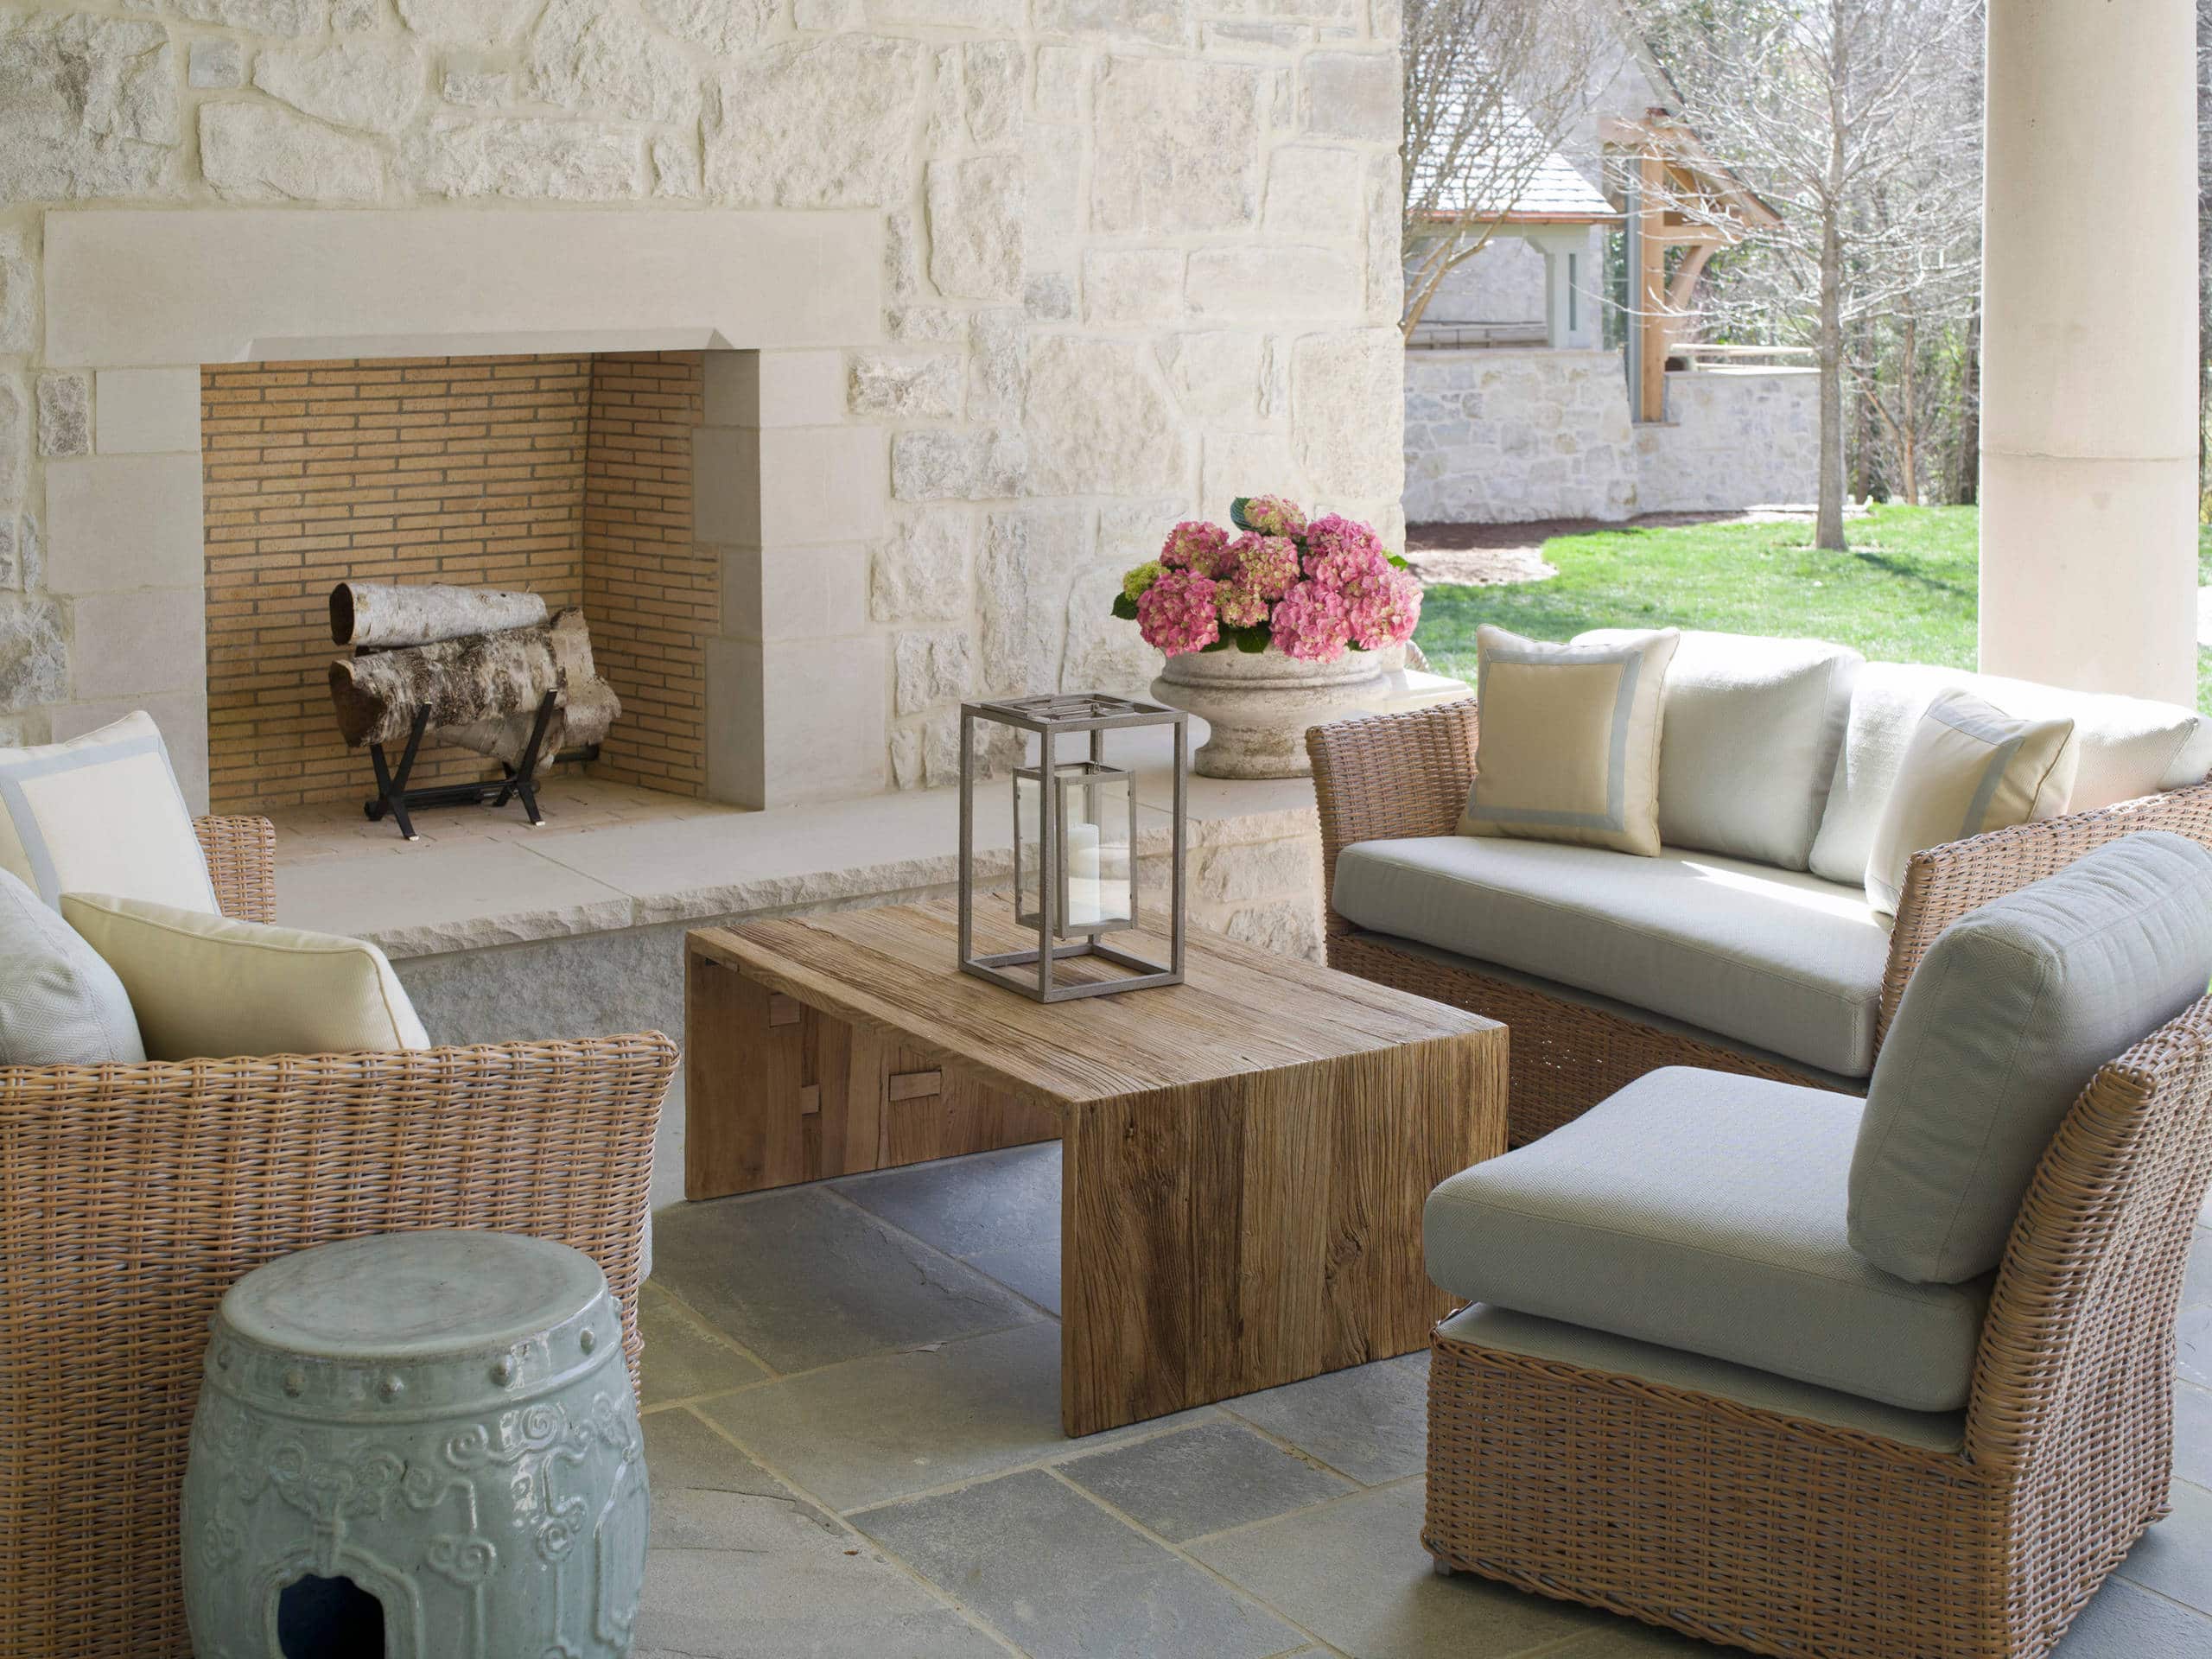 home tour in traditional style design, featuring outdoor patio